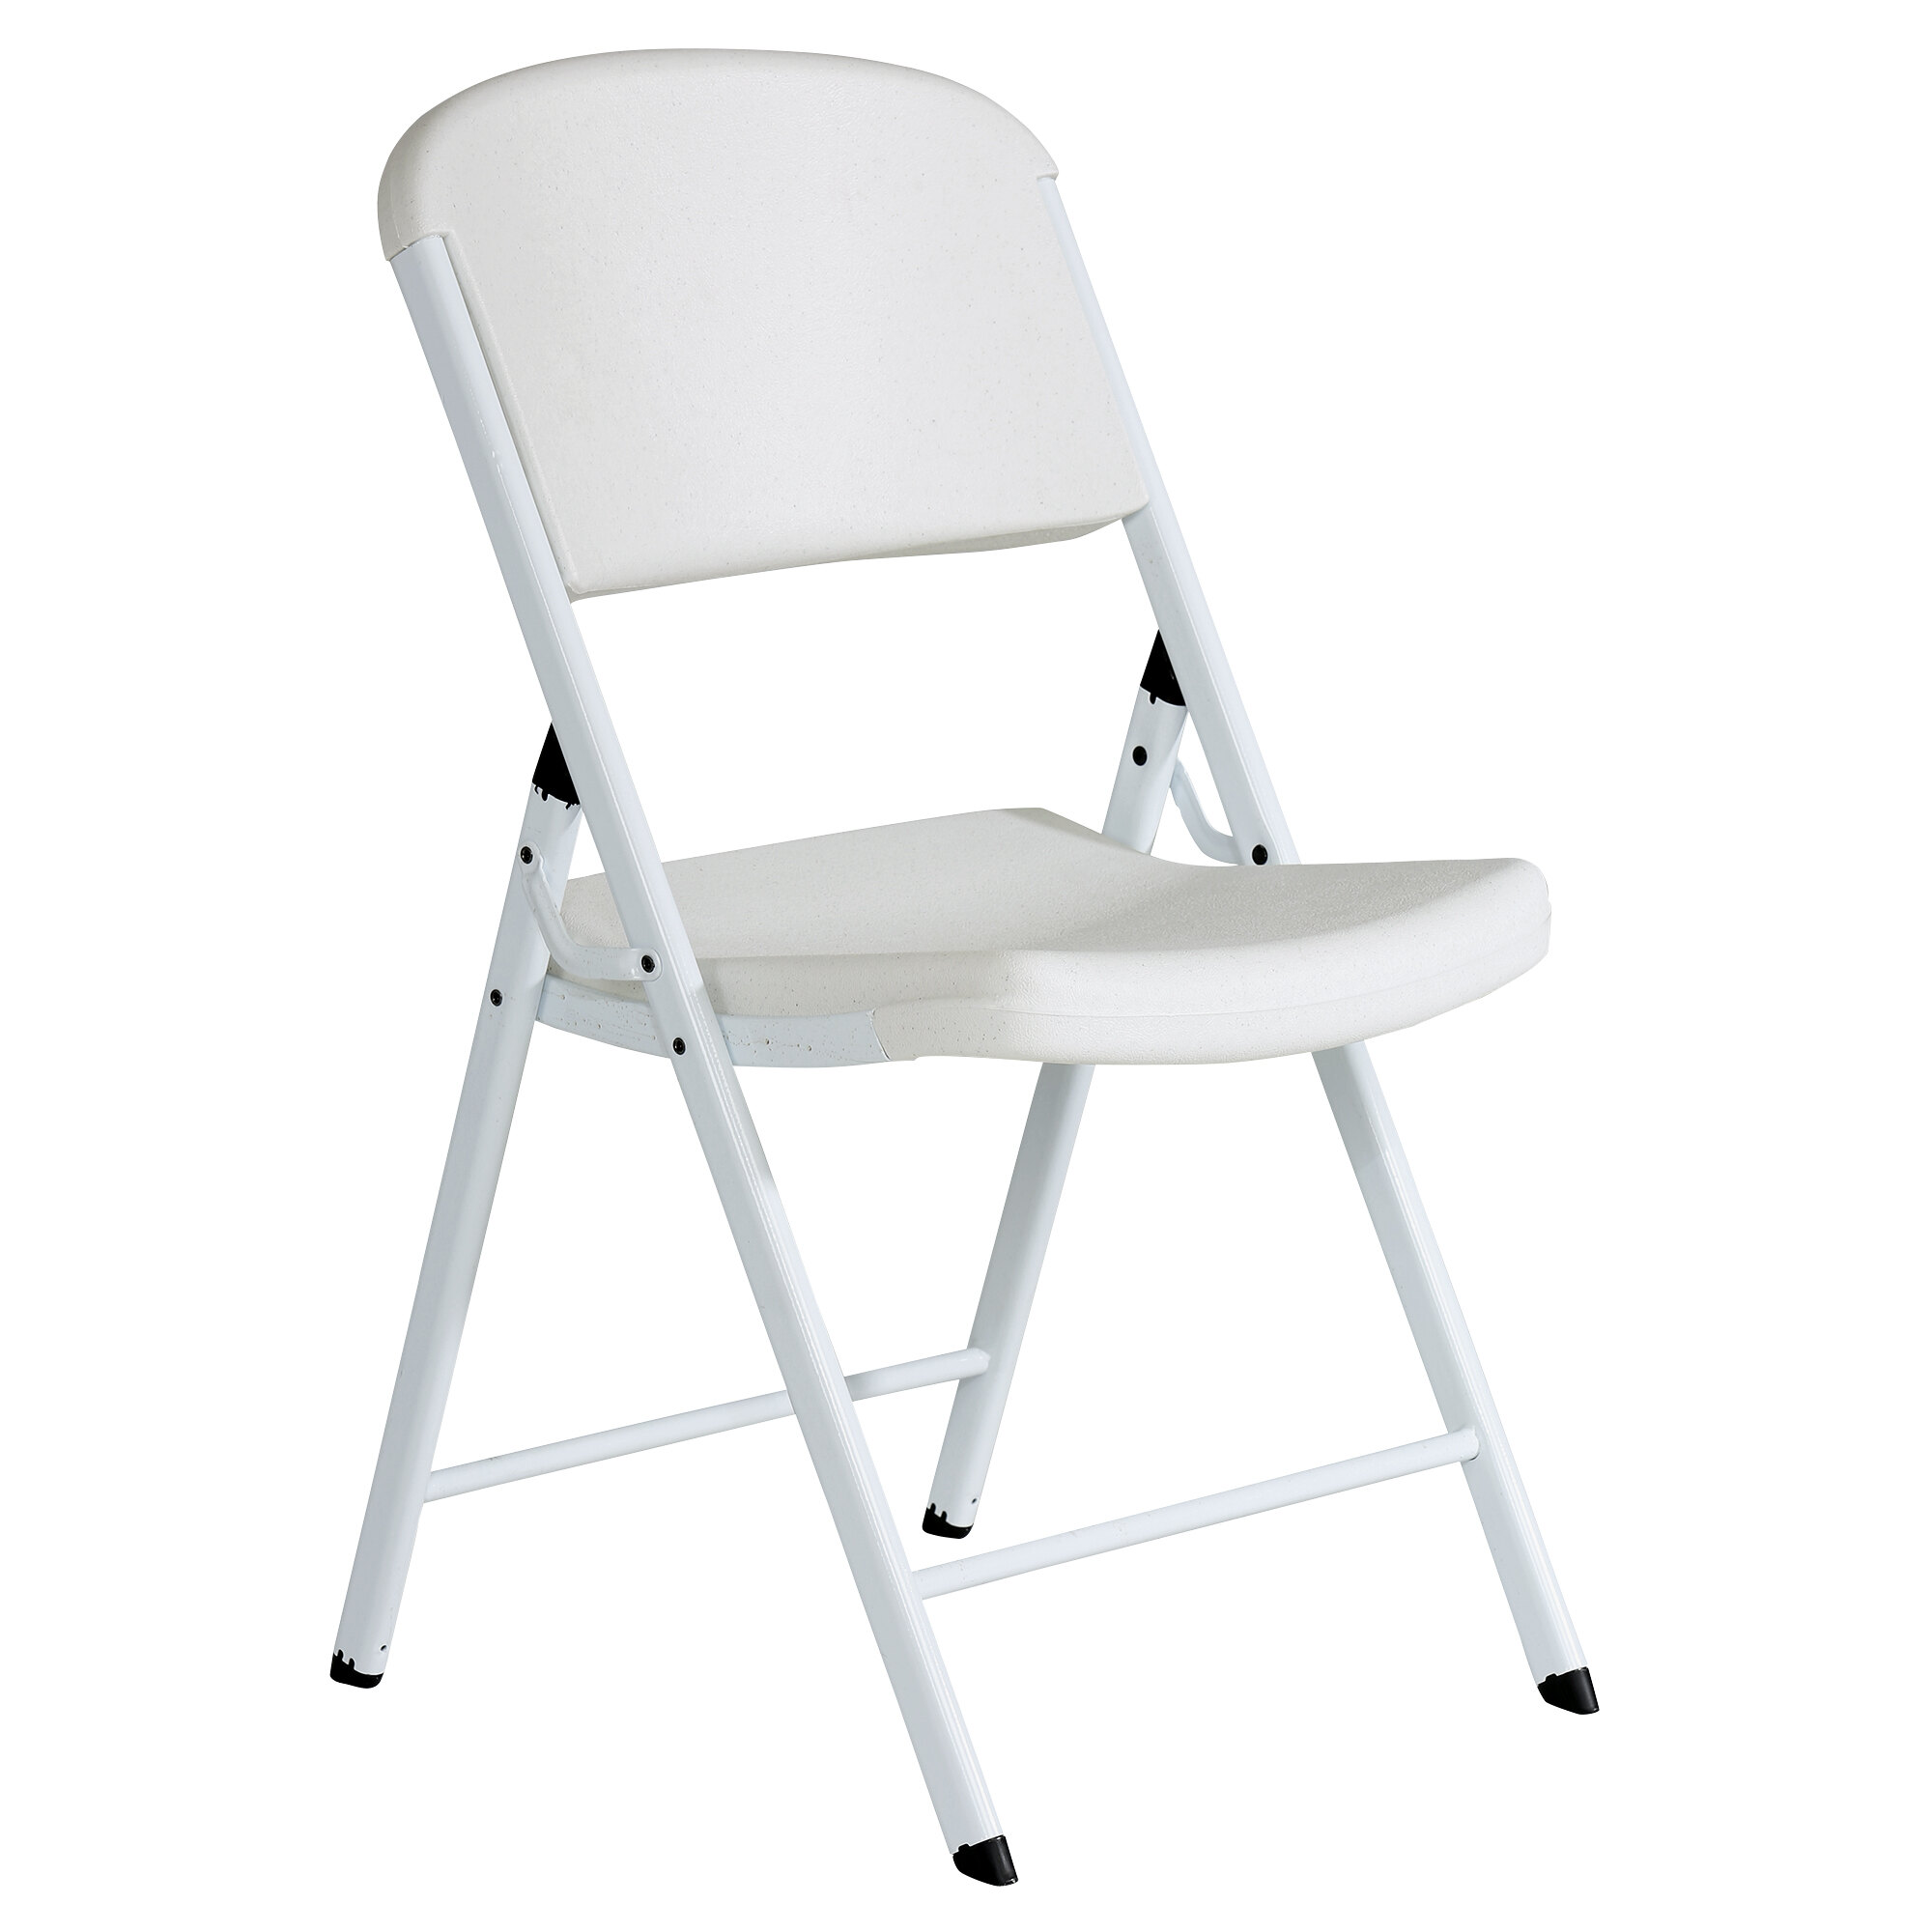 Lifetime 80359 White Contoured Folding Chair - 4/Pack